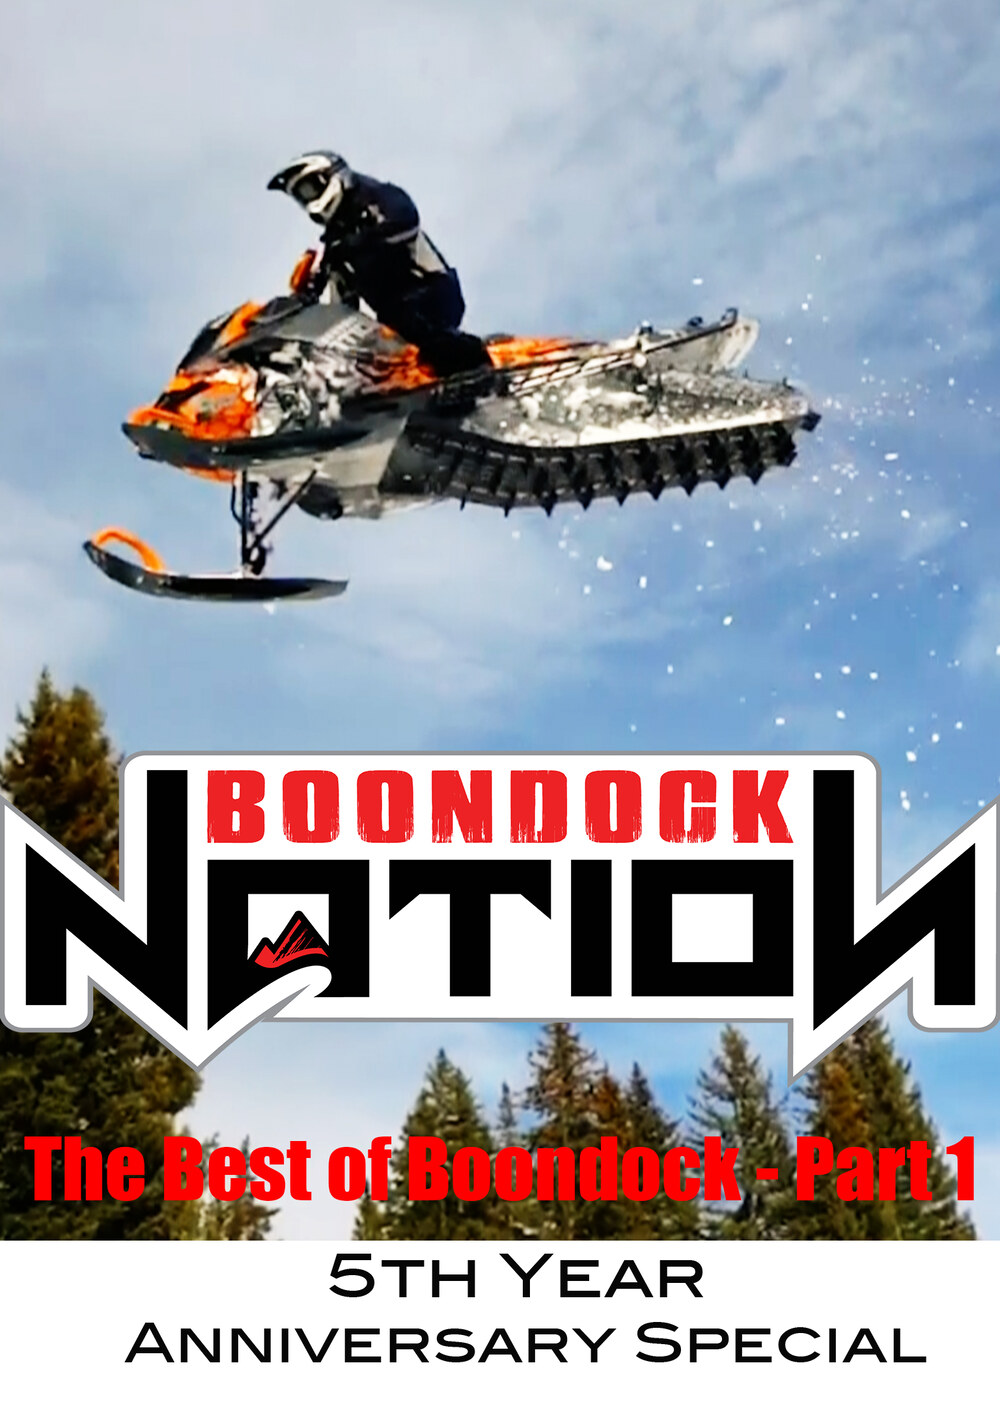 K5038 - The Best of Boondock - Part 1 - 5th Year Anniversary Special